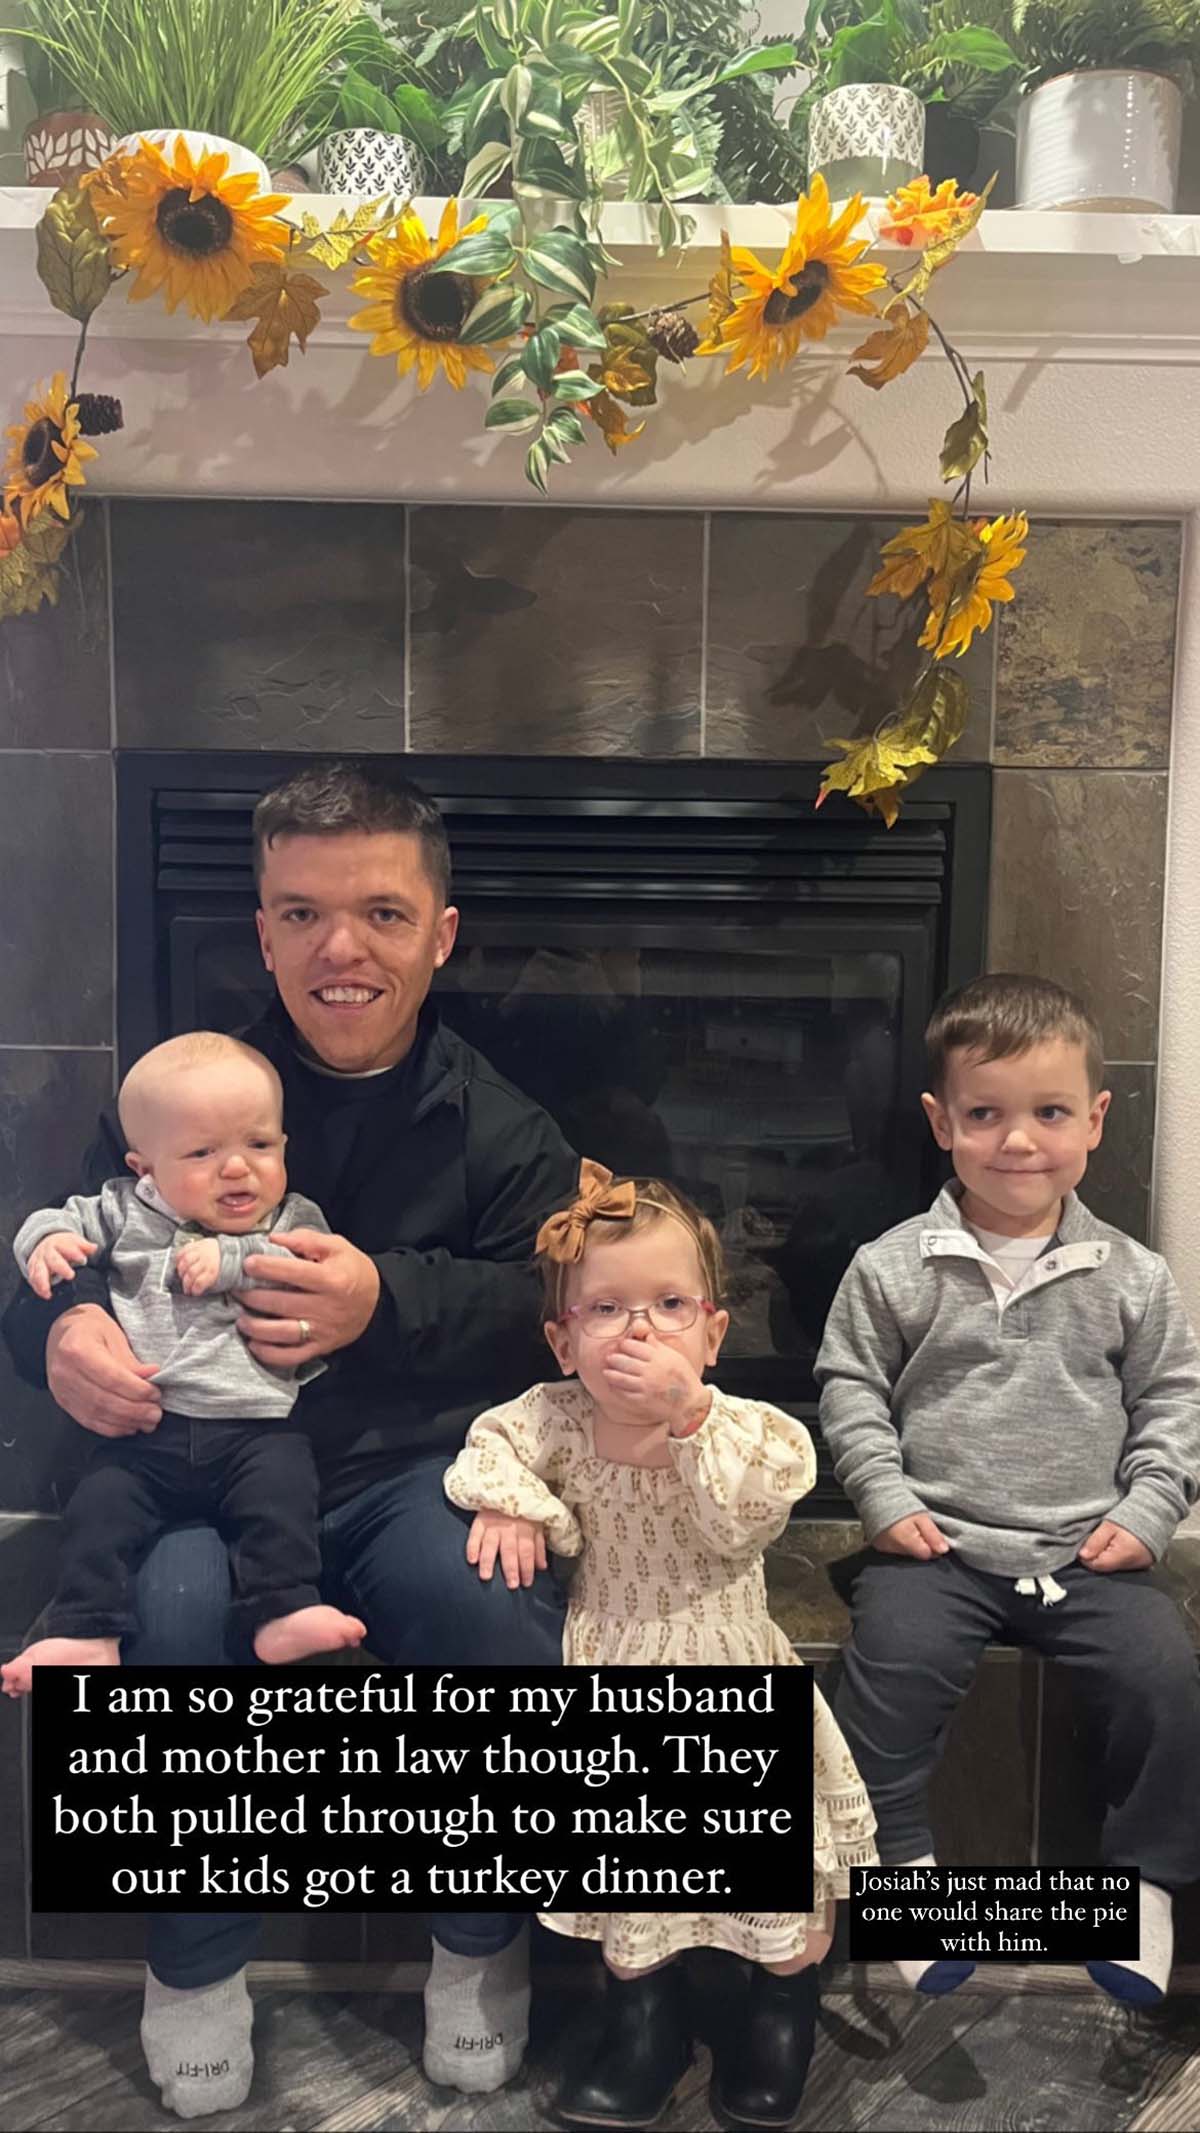 Sick Tori Roloff ‘Bummed’ She Couldn’t Host Thanksgiving With Family